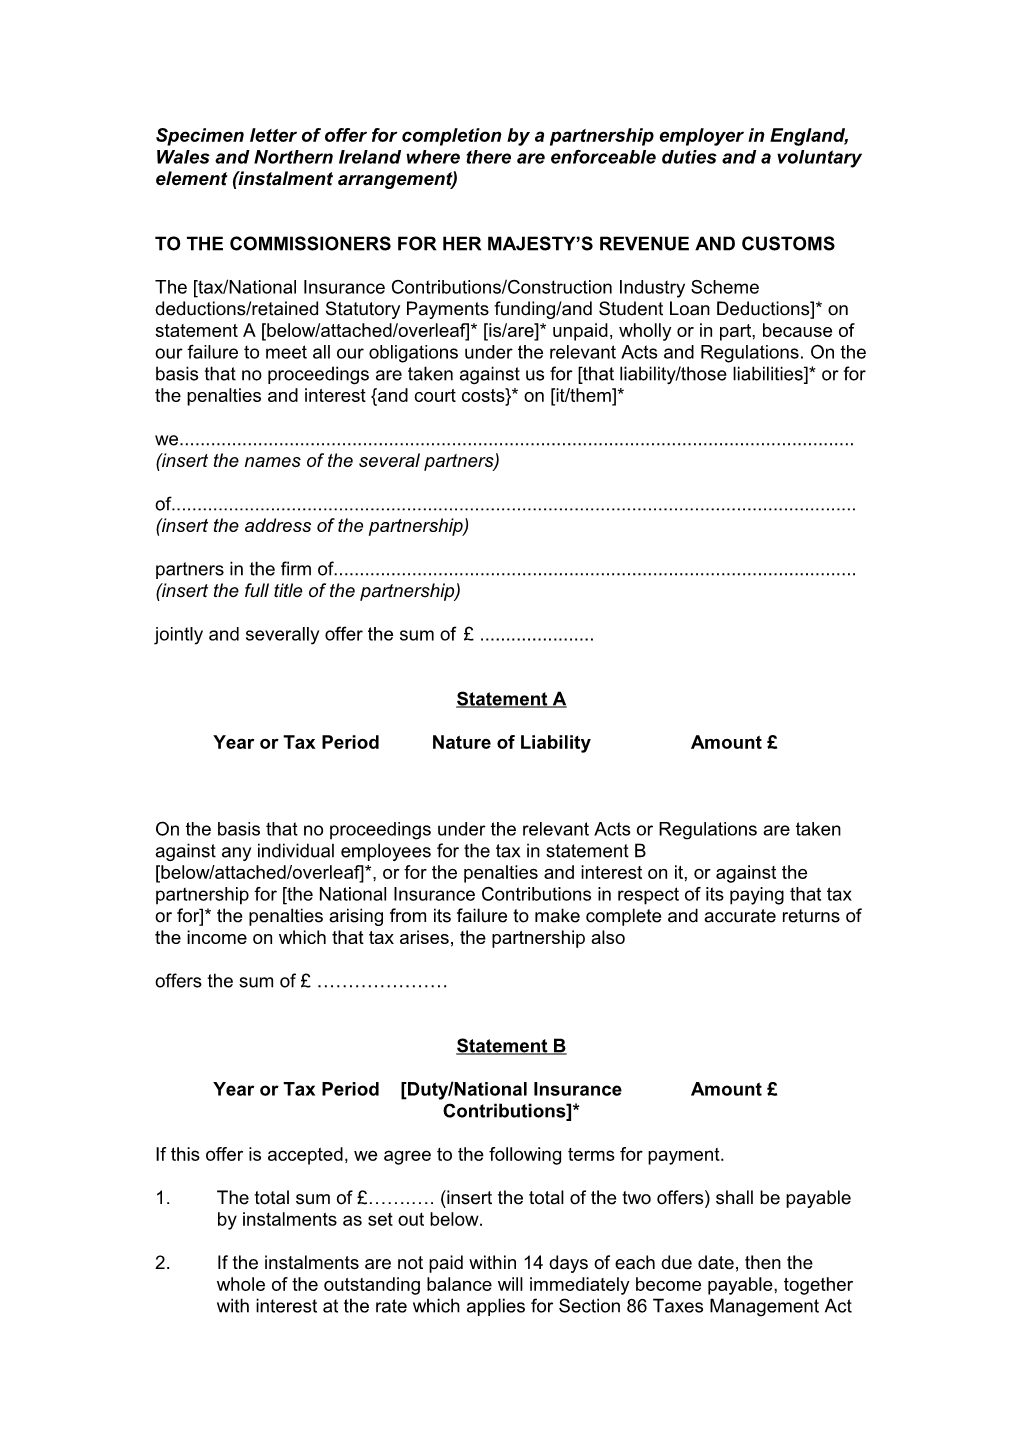 Specimen Letter of Offer for Completion by a Partnership Employer in England, Wales And